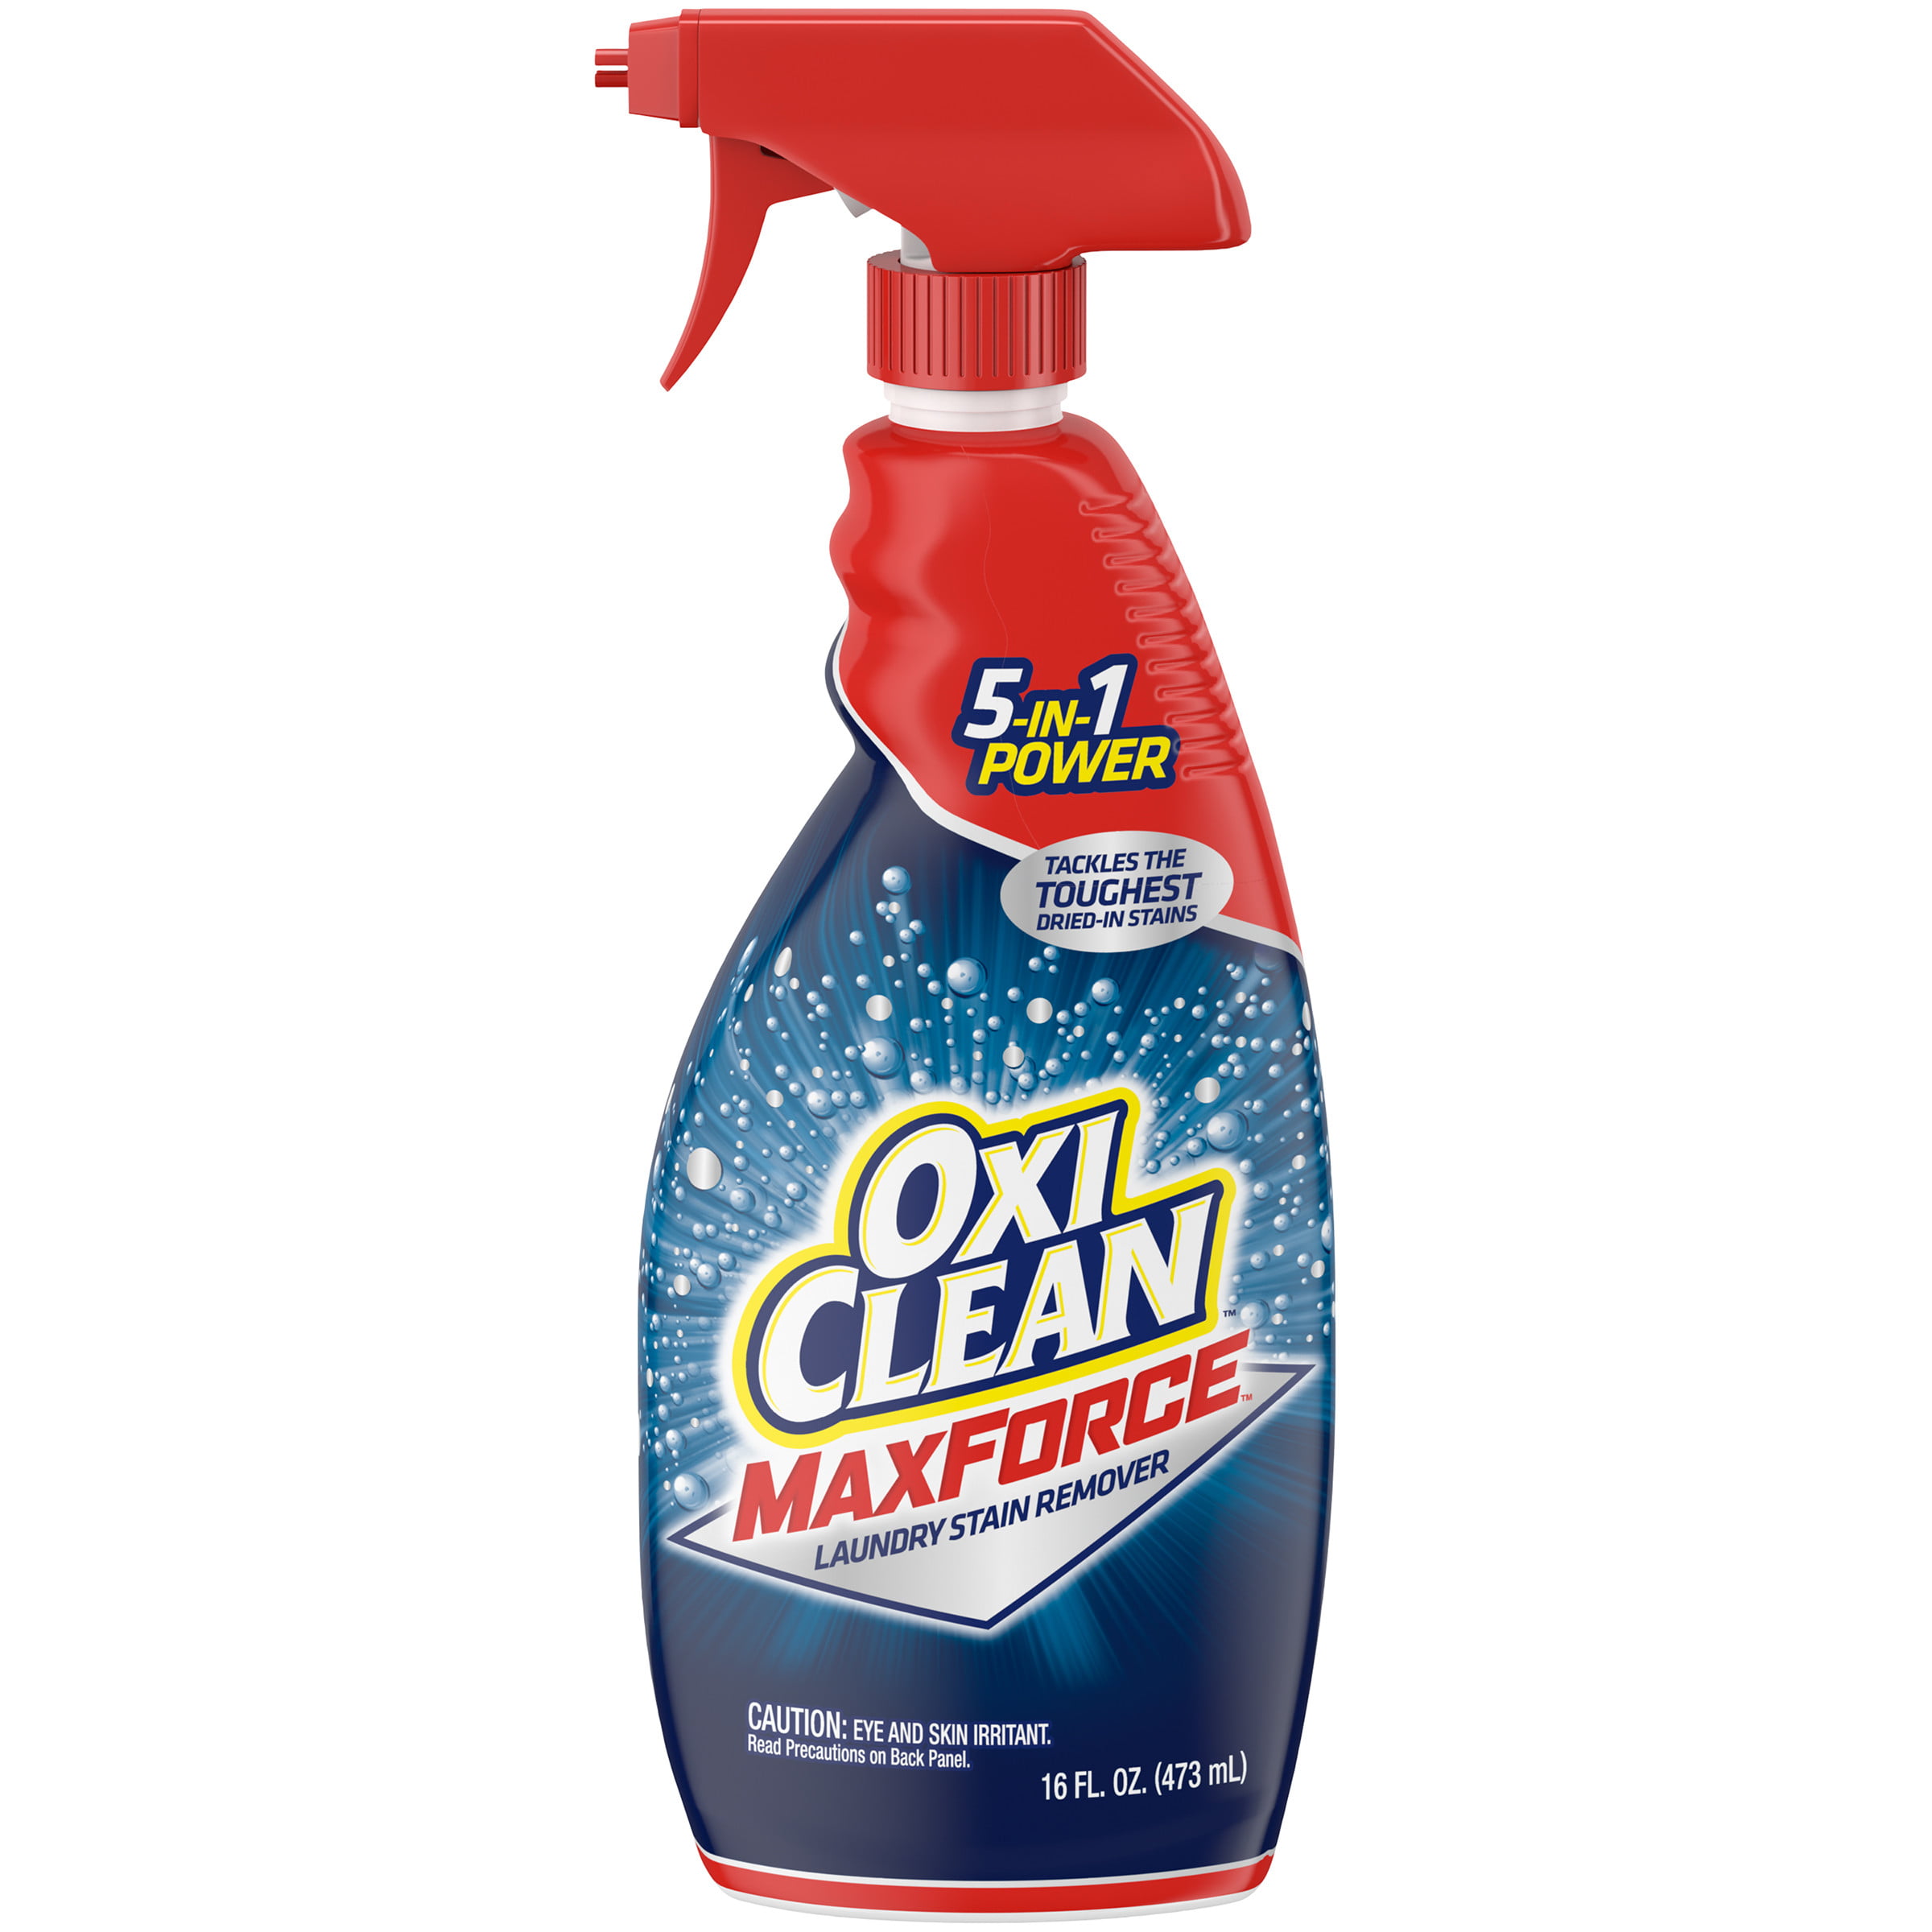 OxiClean MaxForce Laundry  Stain Remover Spray  16 Fl oz 